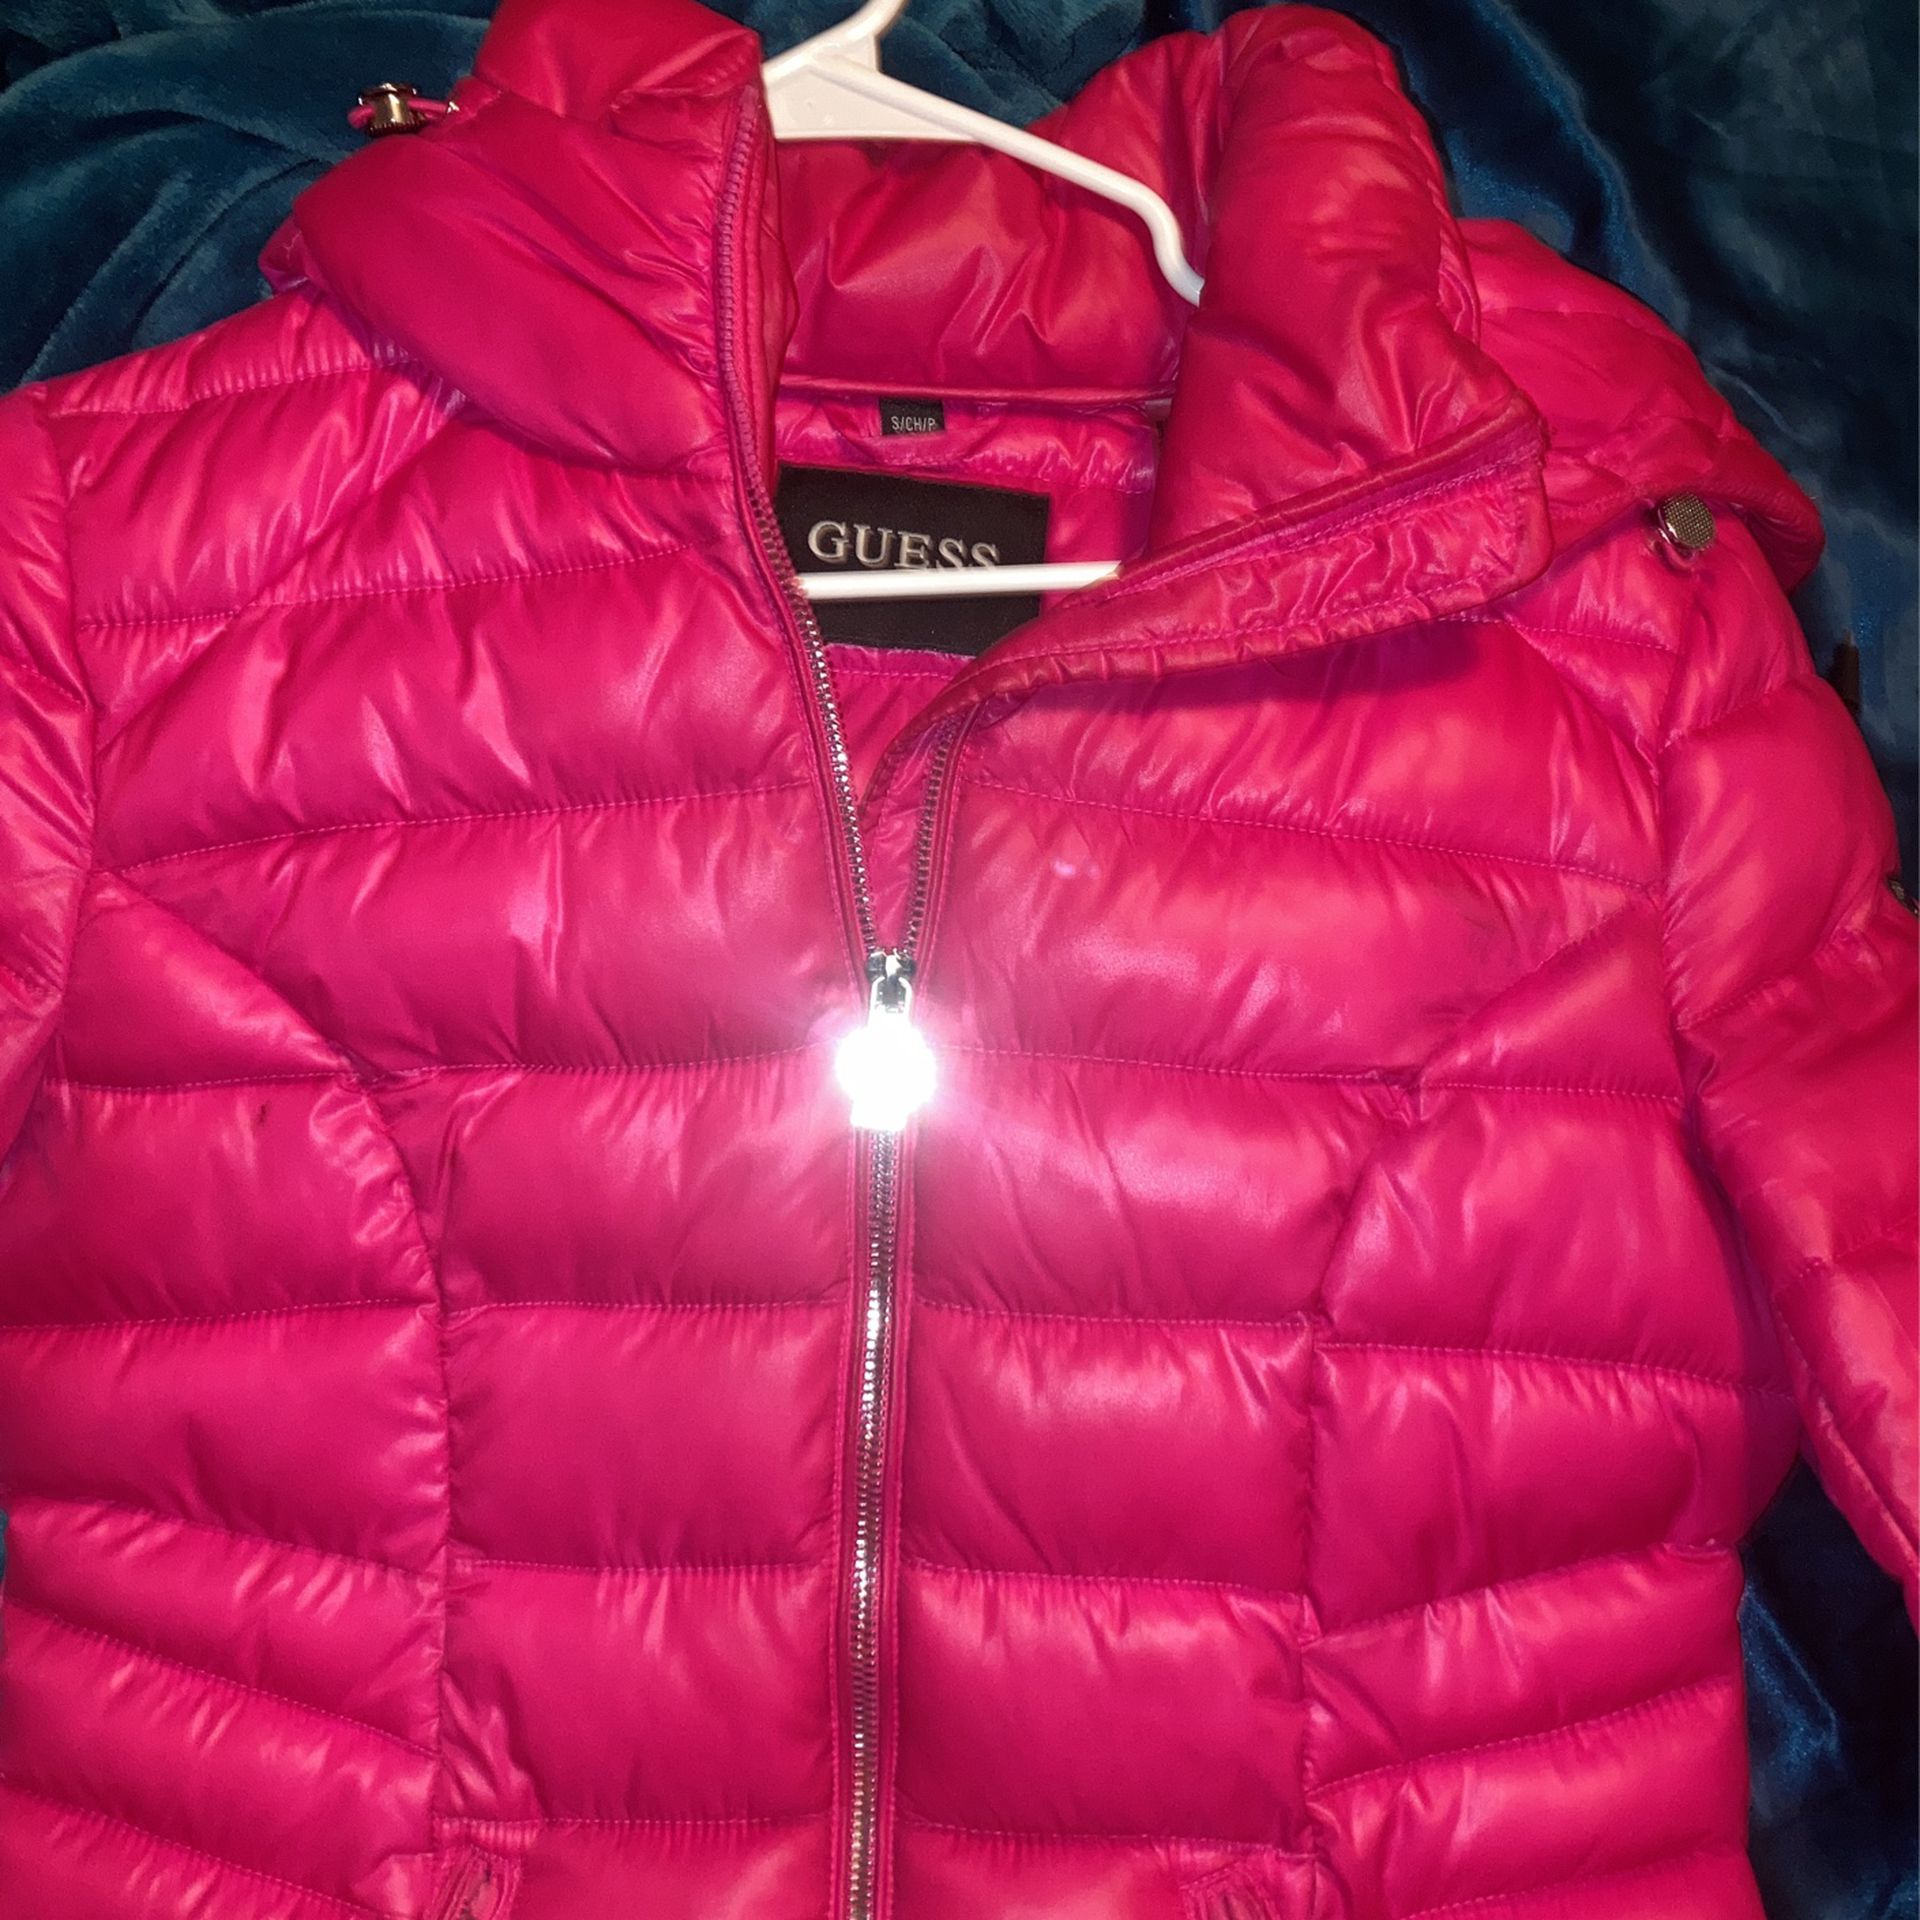 guess Est.1981 Jacket (color Pink) size Small In Men 